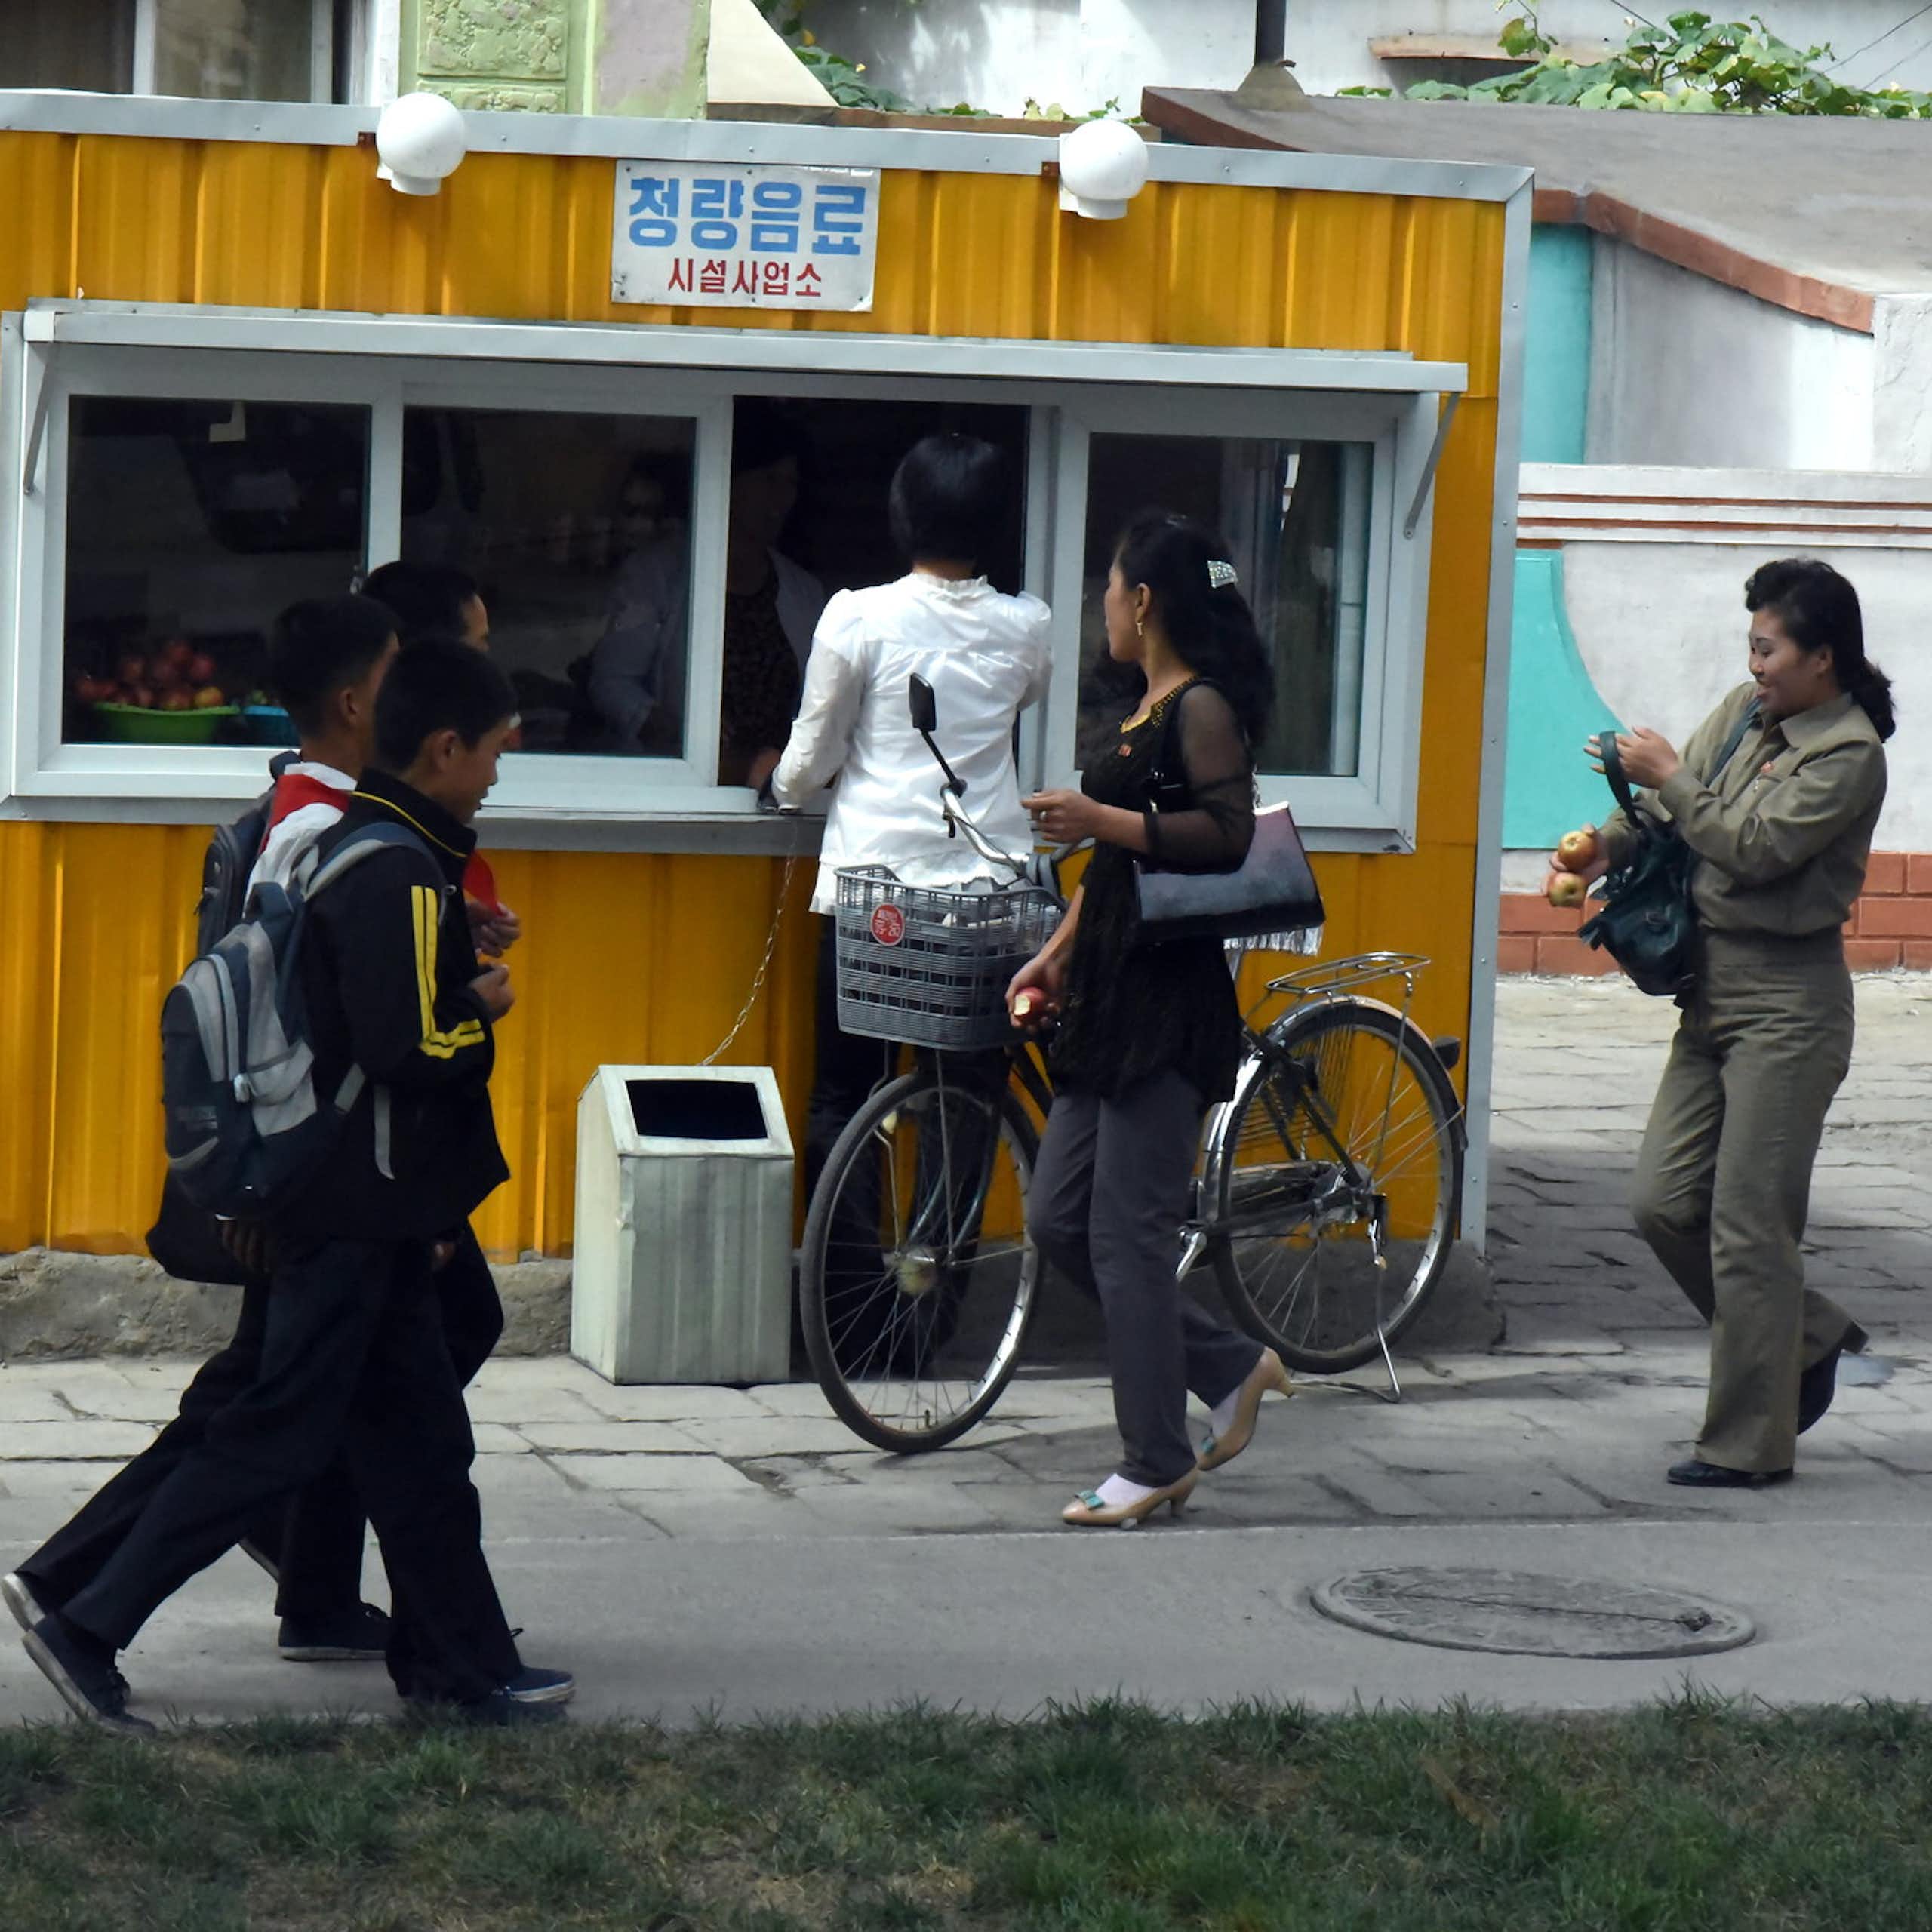 A small shop run by and serving women in North Korea. 